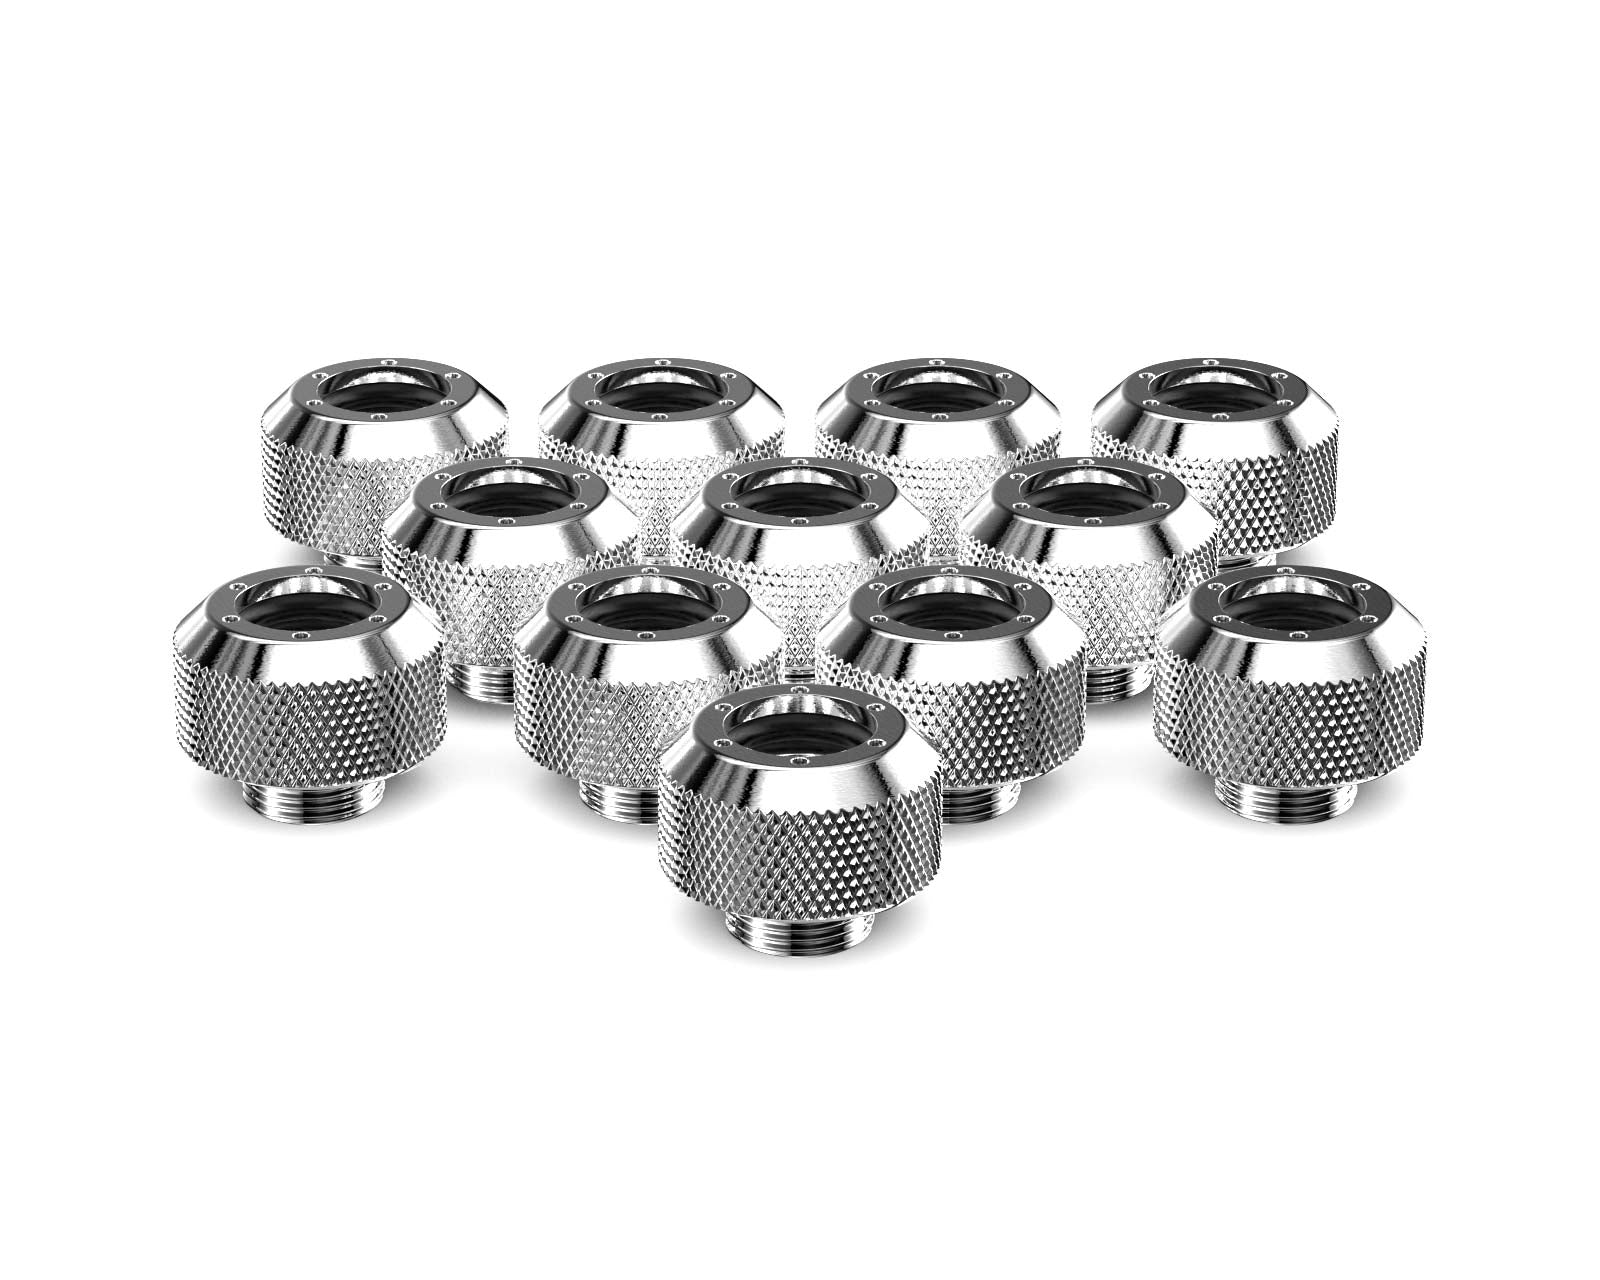 PrimoChill 1/2in. Rigid RevolverSX Series Fitting - 12 pack - PrimoChill - KEEPING IT COOL Silver Nickel